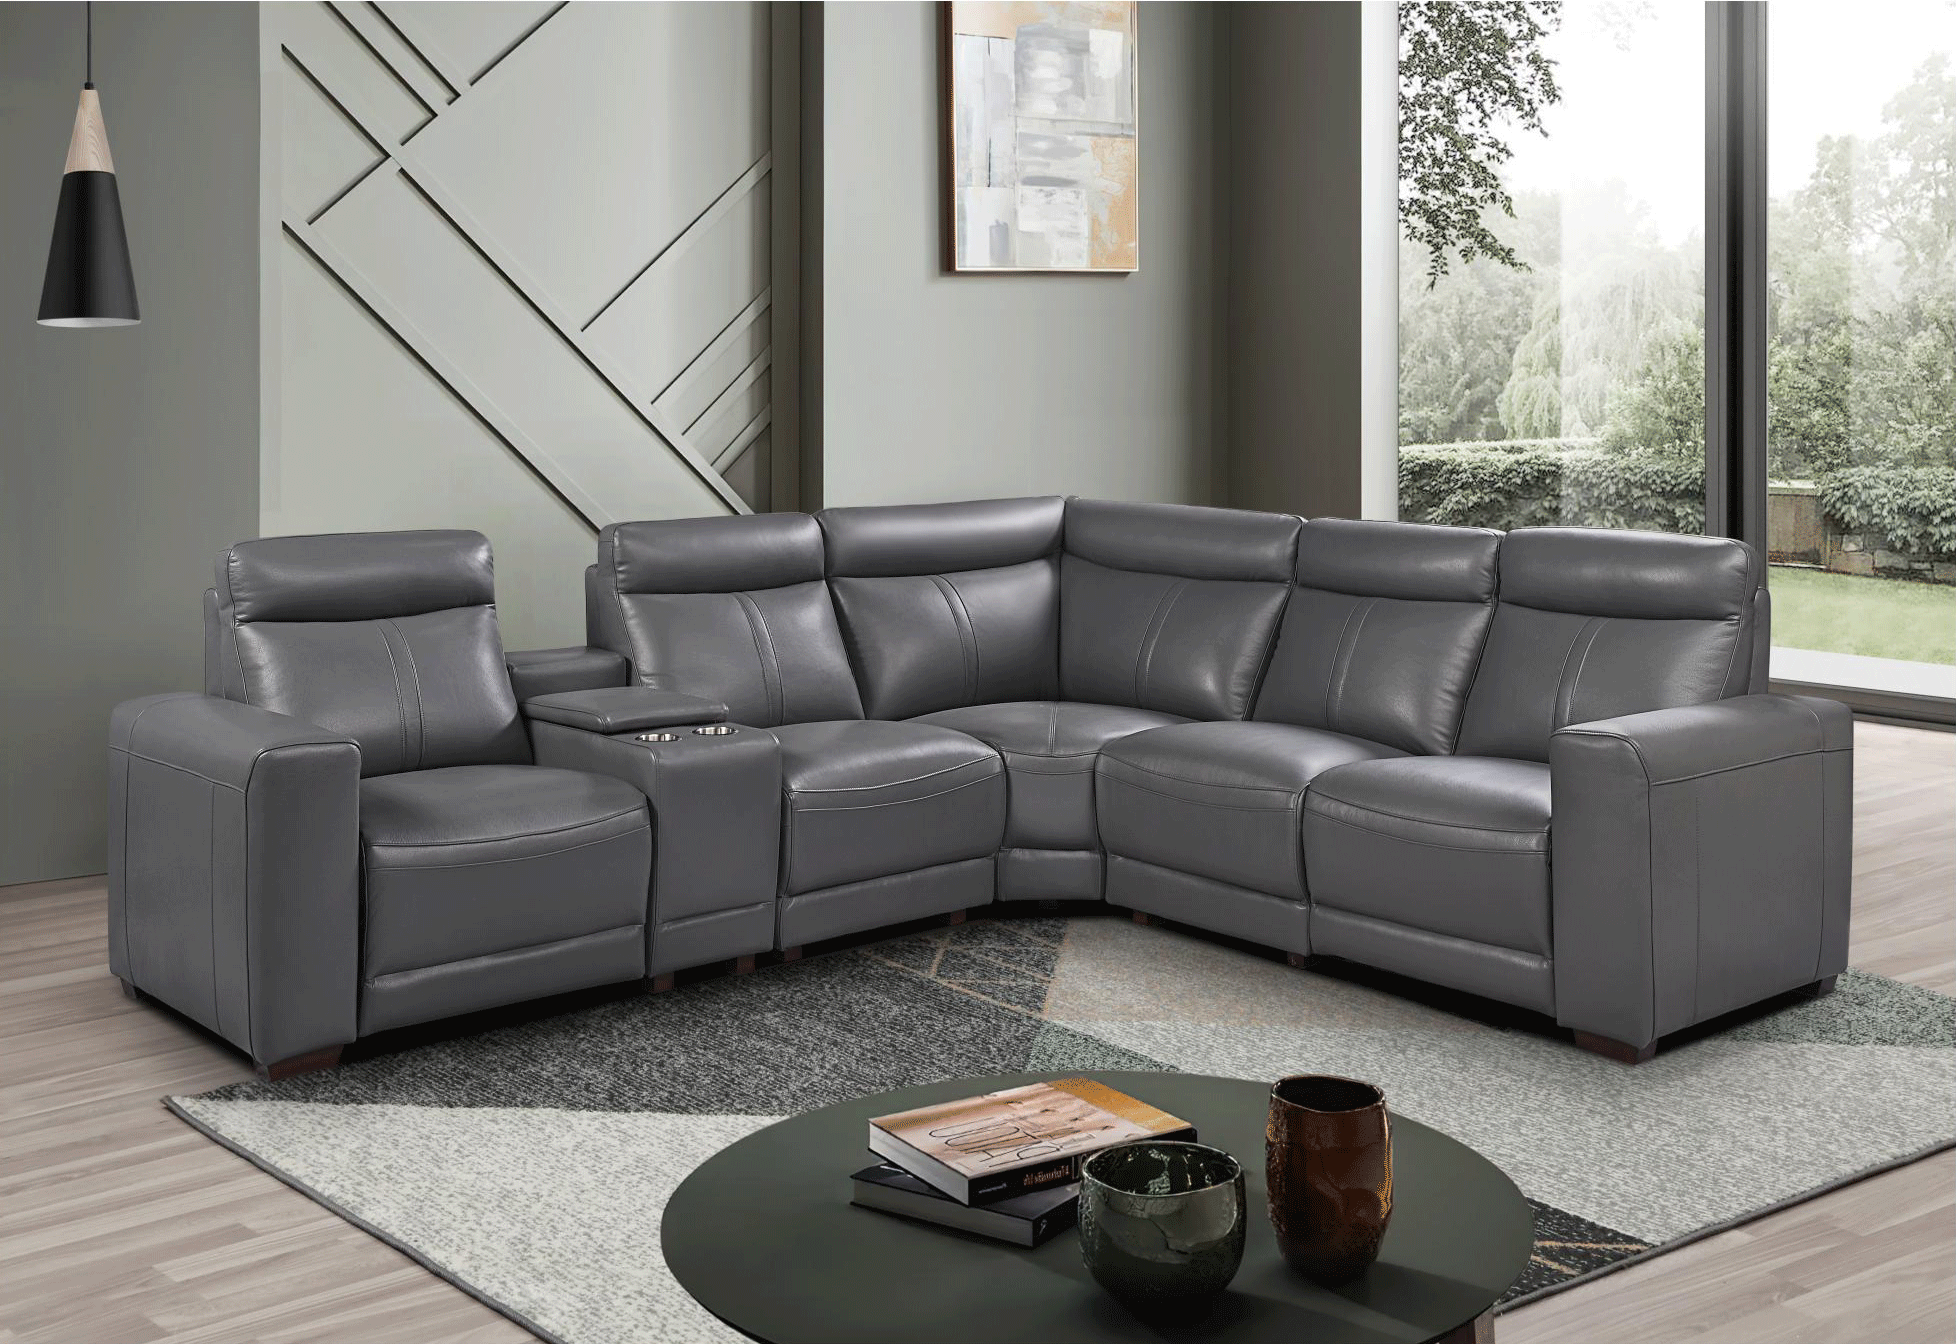 Living Room Furniture Rugs 2777 Sectional w/ recliners